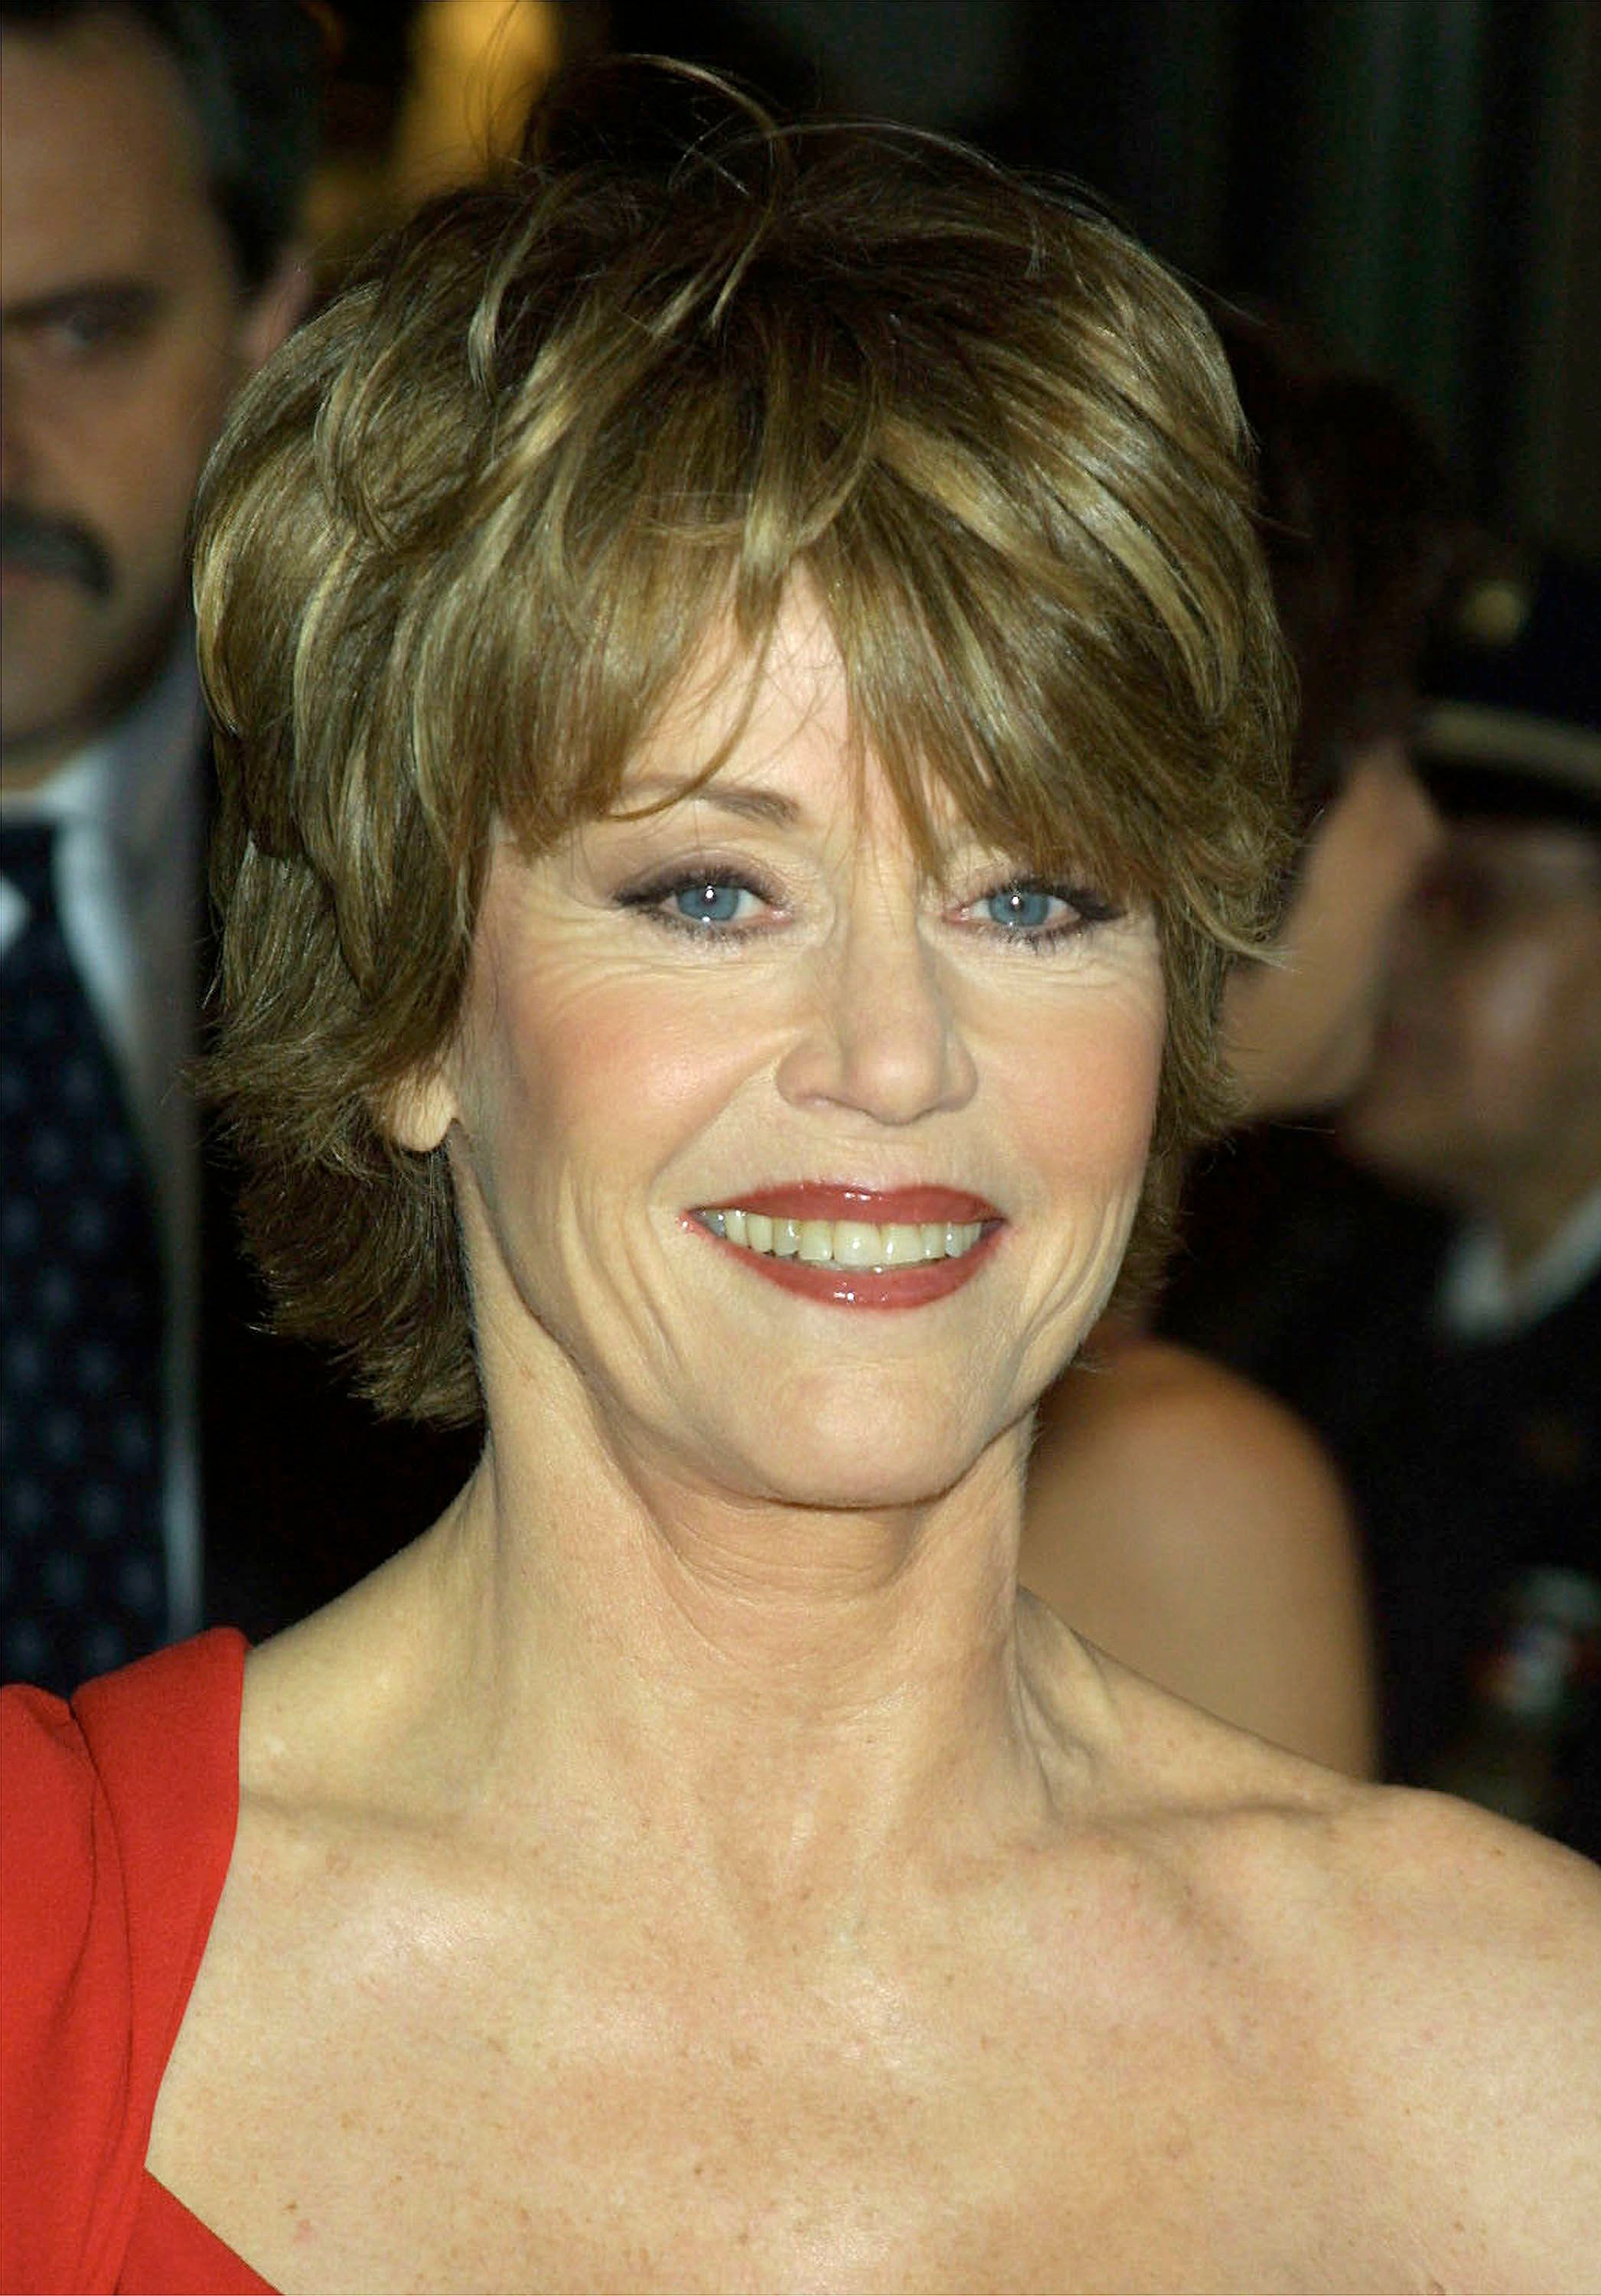 Jane Fonda at the Film Society of Lincoln Center Gala Tribute to her career as an actress on May 7, 2001, in New York City. | Source: George De Sota/Newsmakers/Getty Images